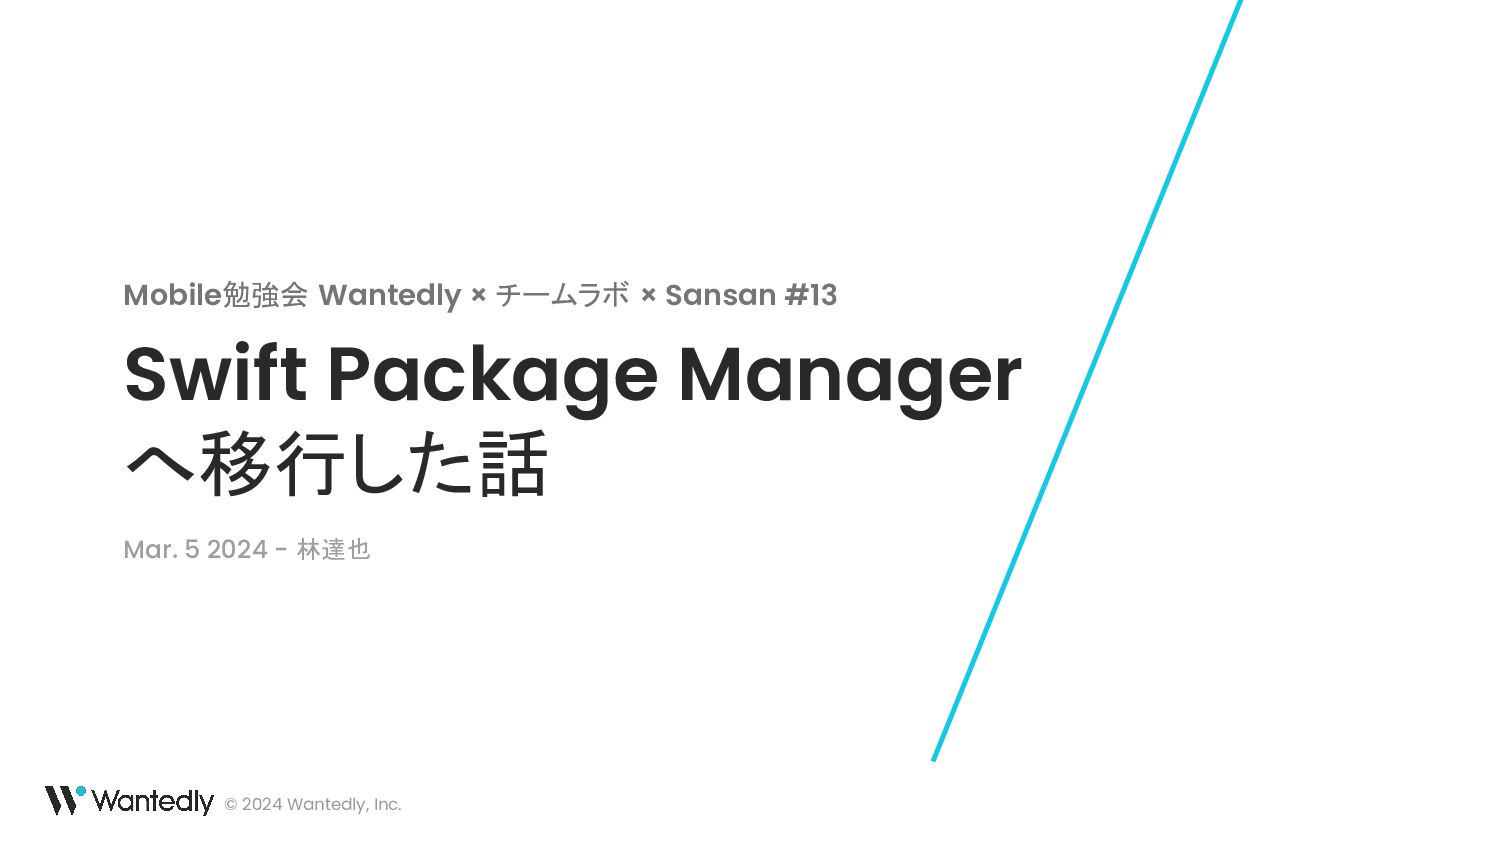 Swift Package Manager へ移行した話